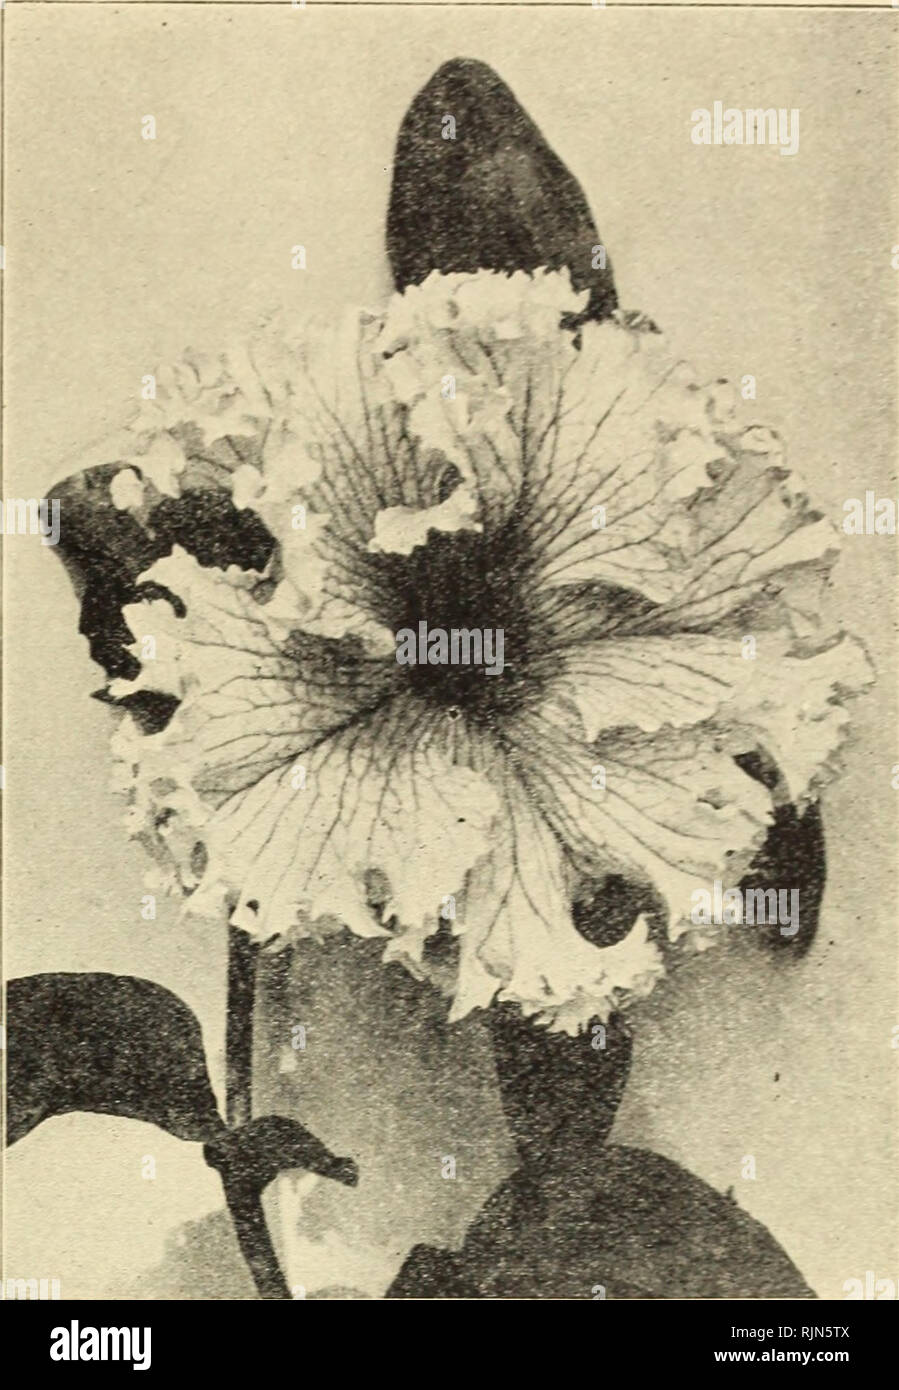 . Barnard's florists' price list : spring 1929. Seeds Catalogs; Flowers Seeds Catalogs; Nurseries (Horticulture) Catalogs; Gardening Equipment and supplies Catalogs. Type of Large-flowering fringed Petunia T. Pkt. RUDBECKIA Newmanii, Yellow. (P) S0.25 Purpurea (Giant Coneflower) .25 Laciniatus fl. p. (Golden Glow) 50 SALPIGLOSSIS. Mixed 10 Superbissima (Emperor) Azure Blue. Brown, Dark Scarlet, Rose, Violet, each .20 Emperor, large flowers, mixed 15 SAPONARIA Vaccaria Rose (excellent for cutting). Vaccaria Alba 10 Occymolds Splendens. (P) 20 SANVITALIA Procumbens. tl. pi., double Yellow — 15 S Stock Photo